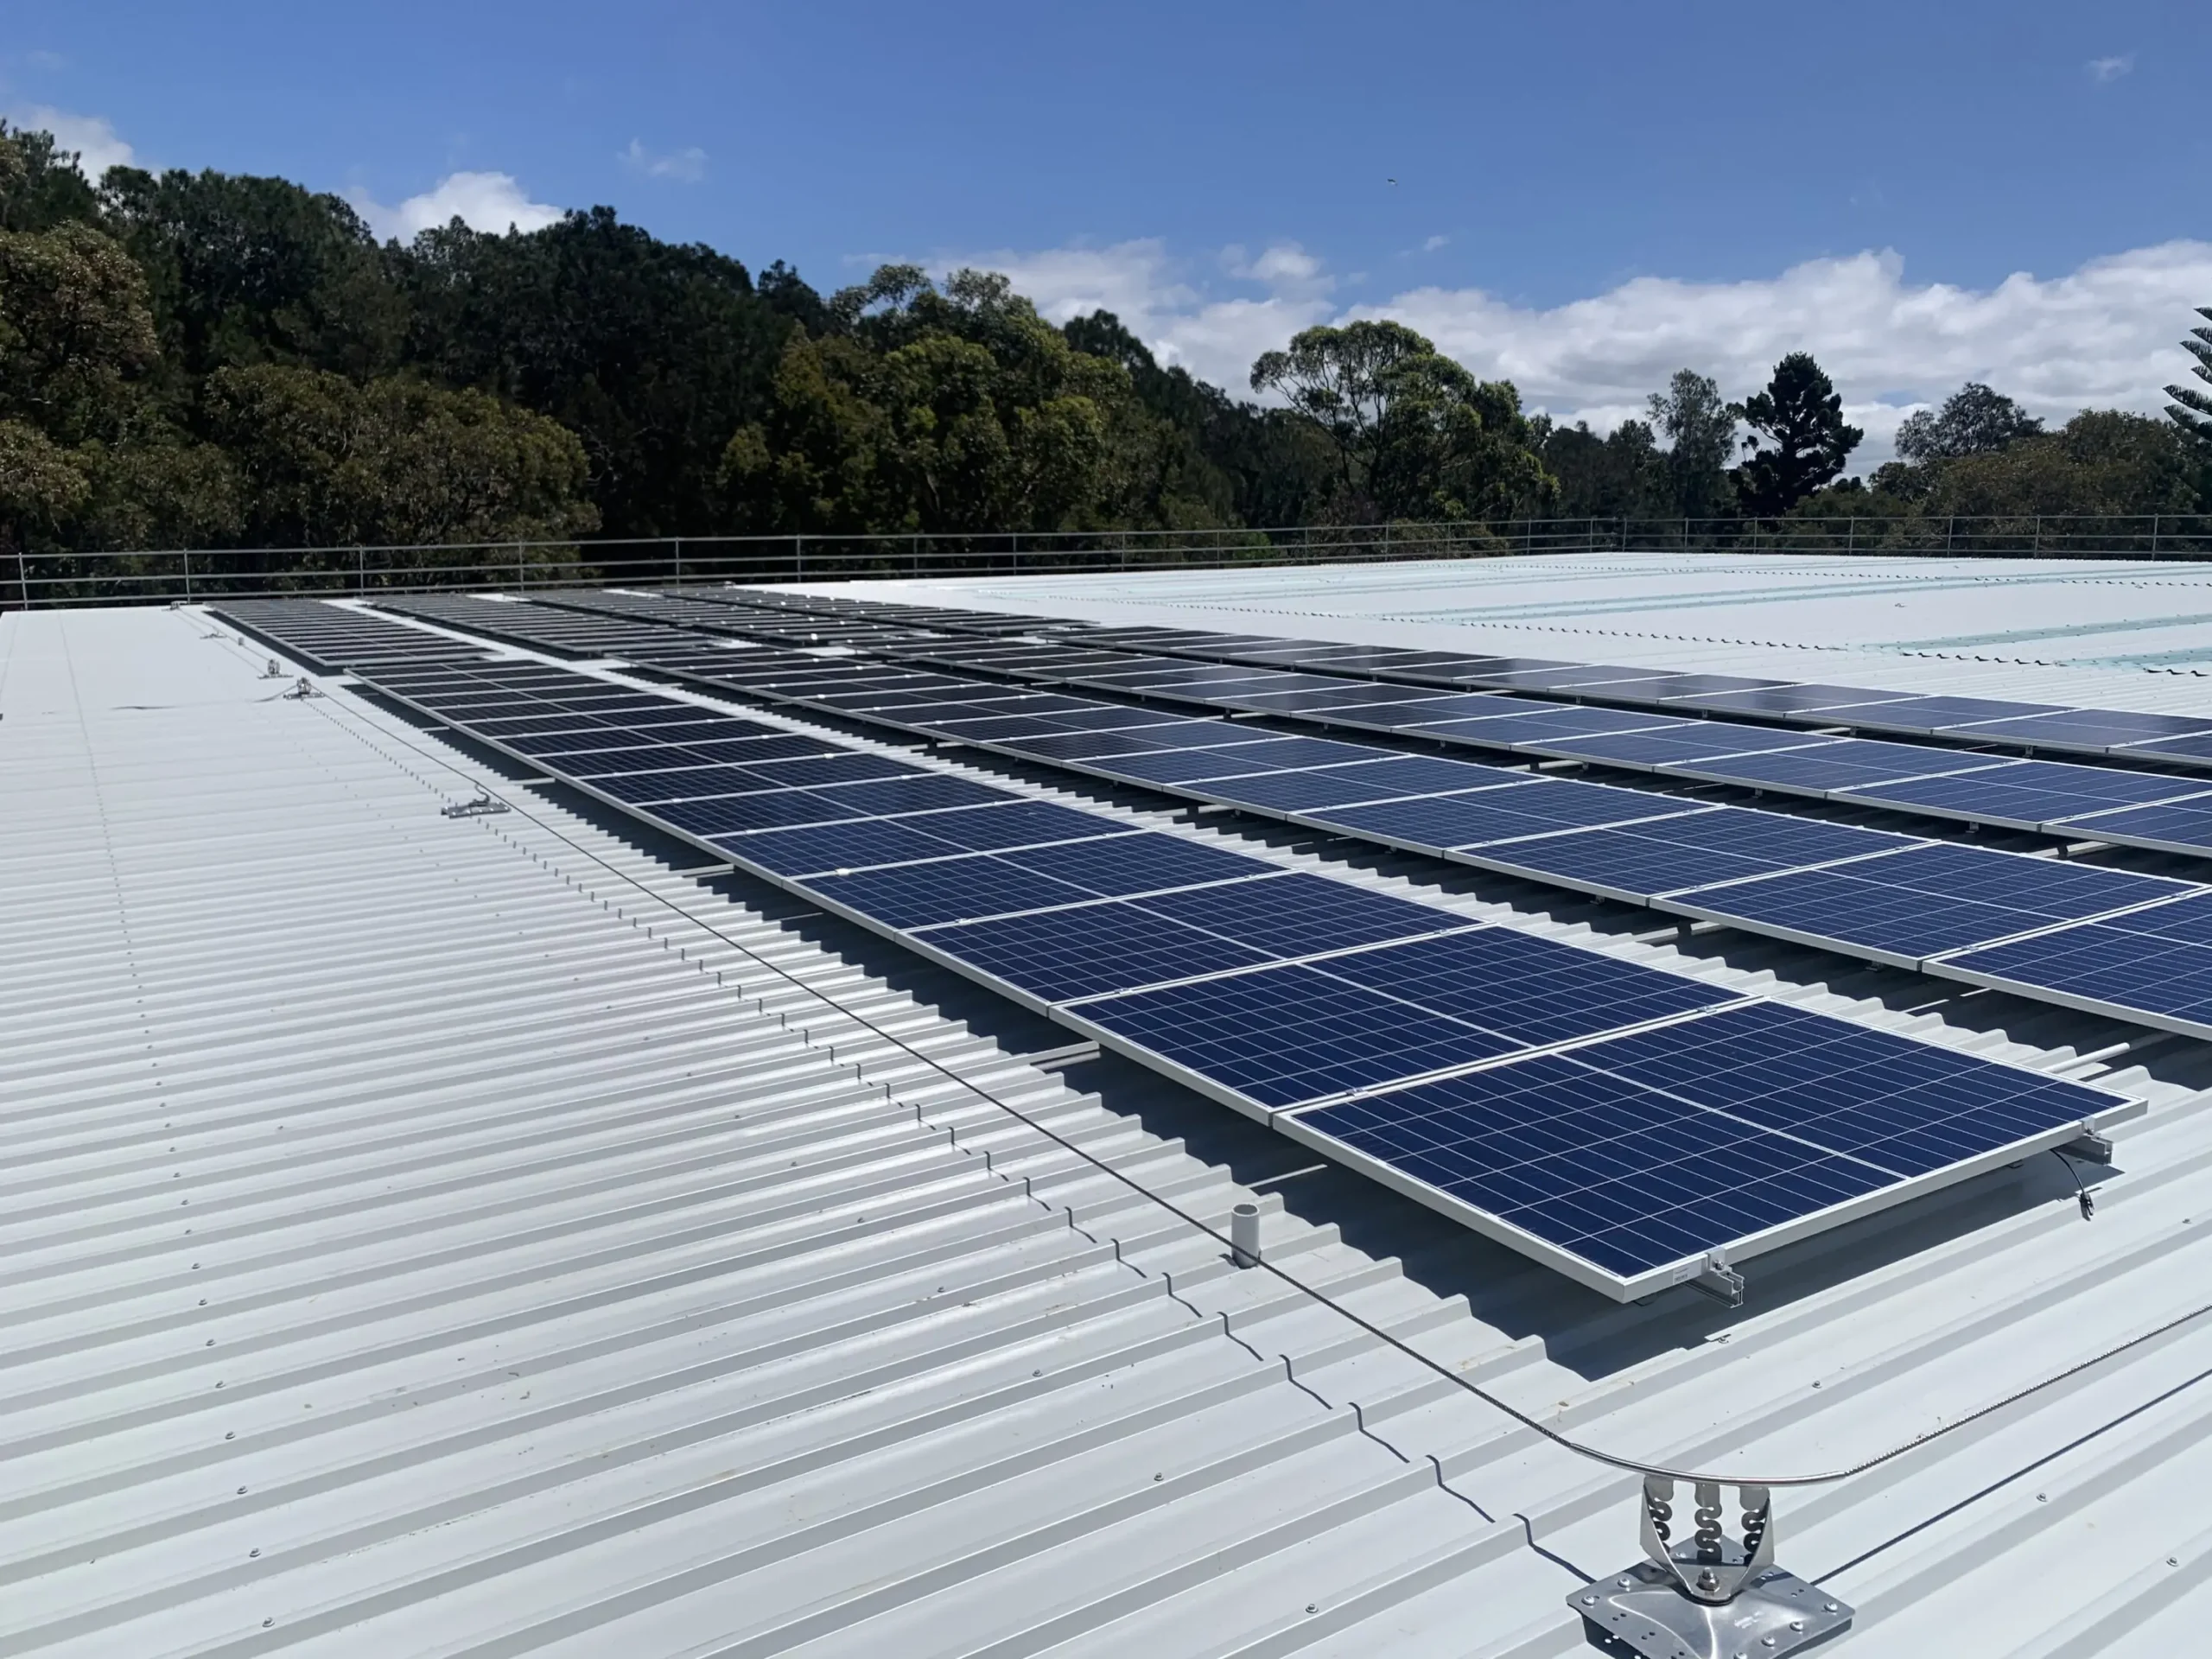 commercial solar energy in nsw - What are the solar energy projects in NSW